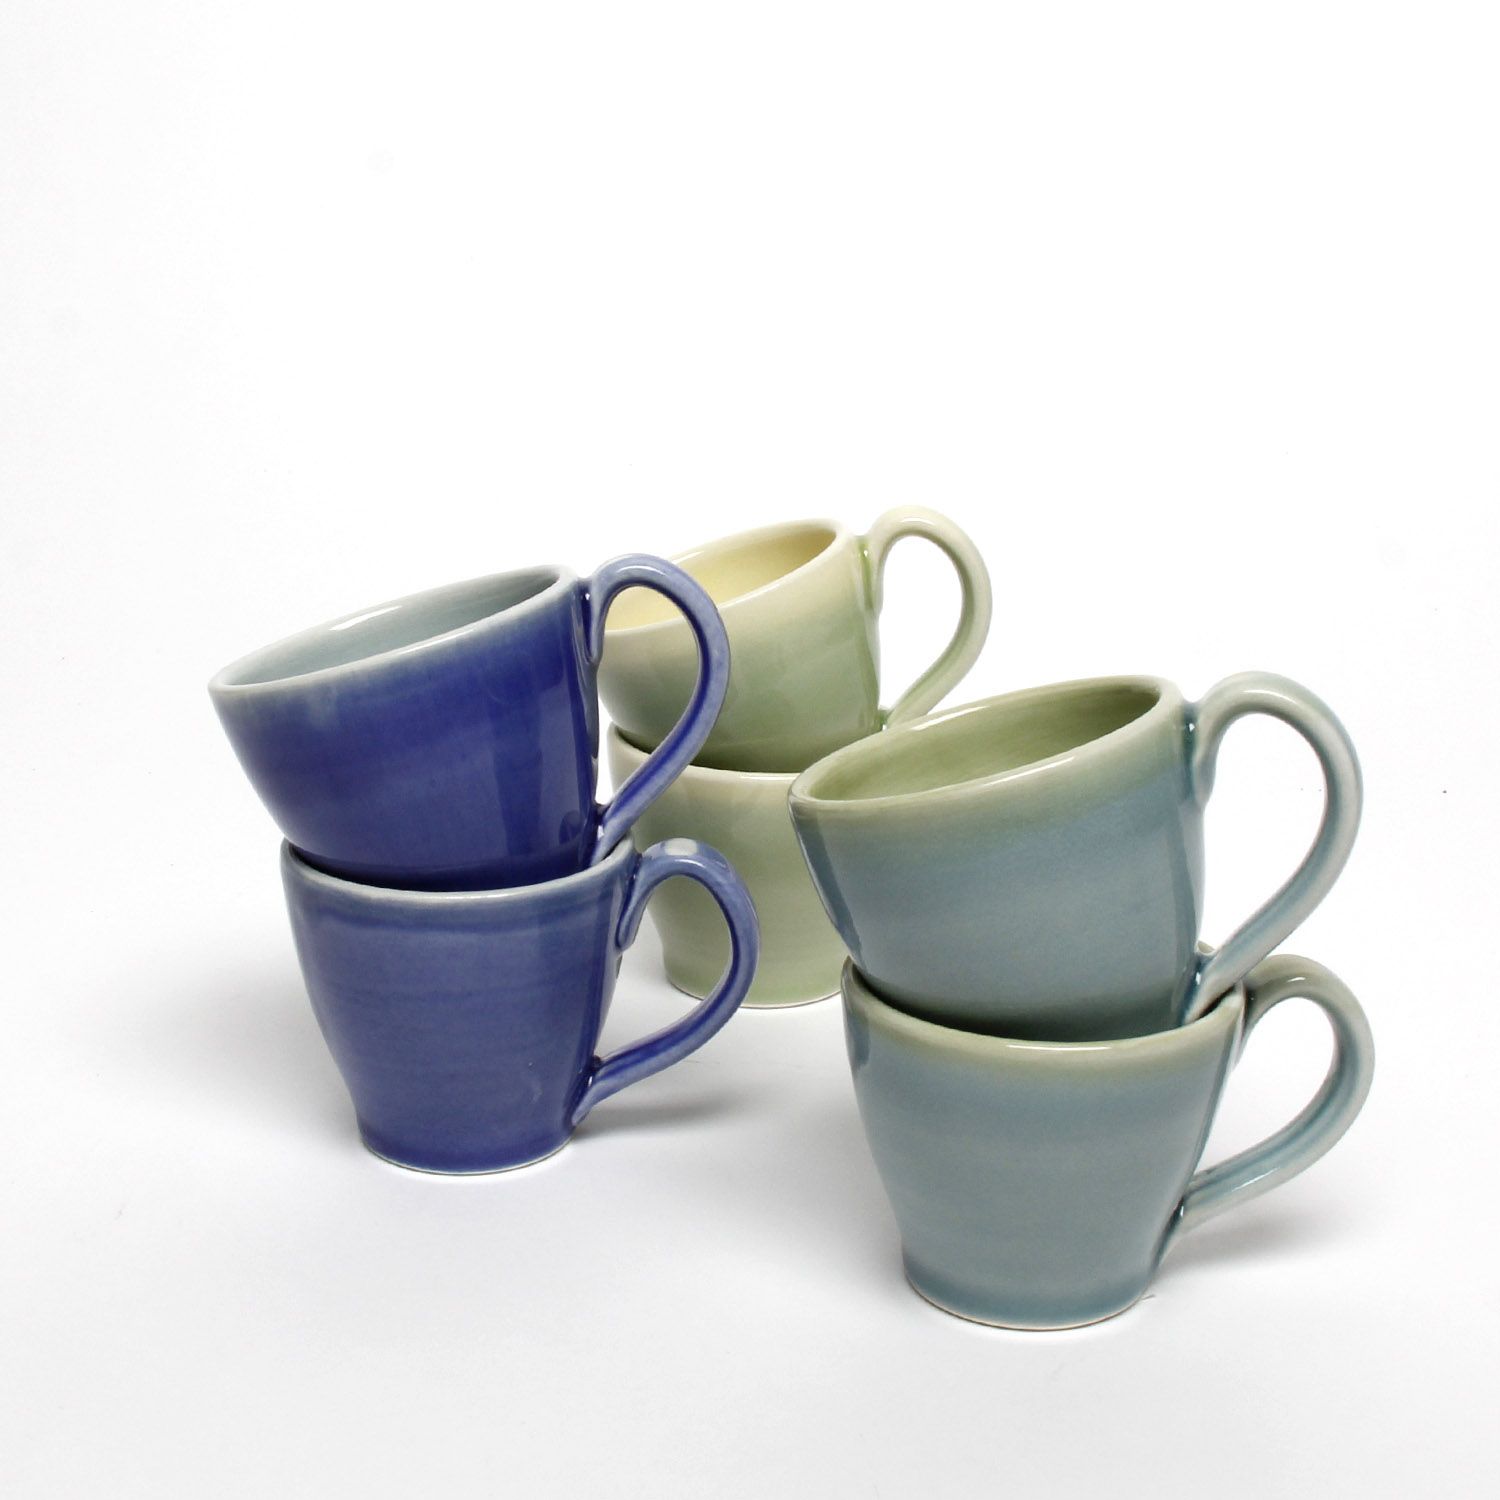 Thomas Aitken: Blue Espresso Cup Product Image 3 of 5